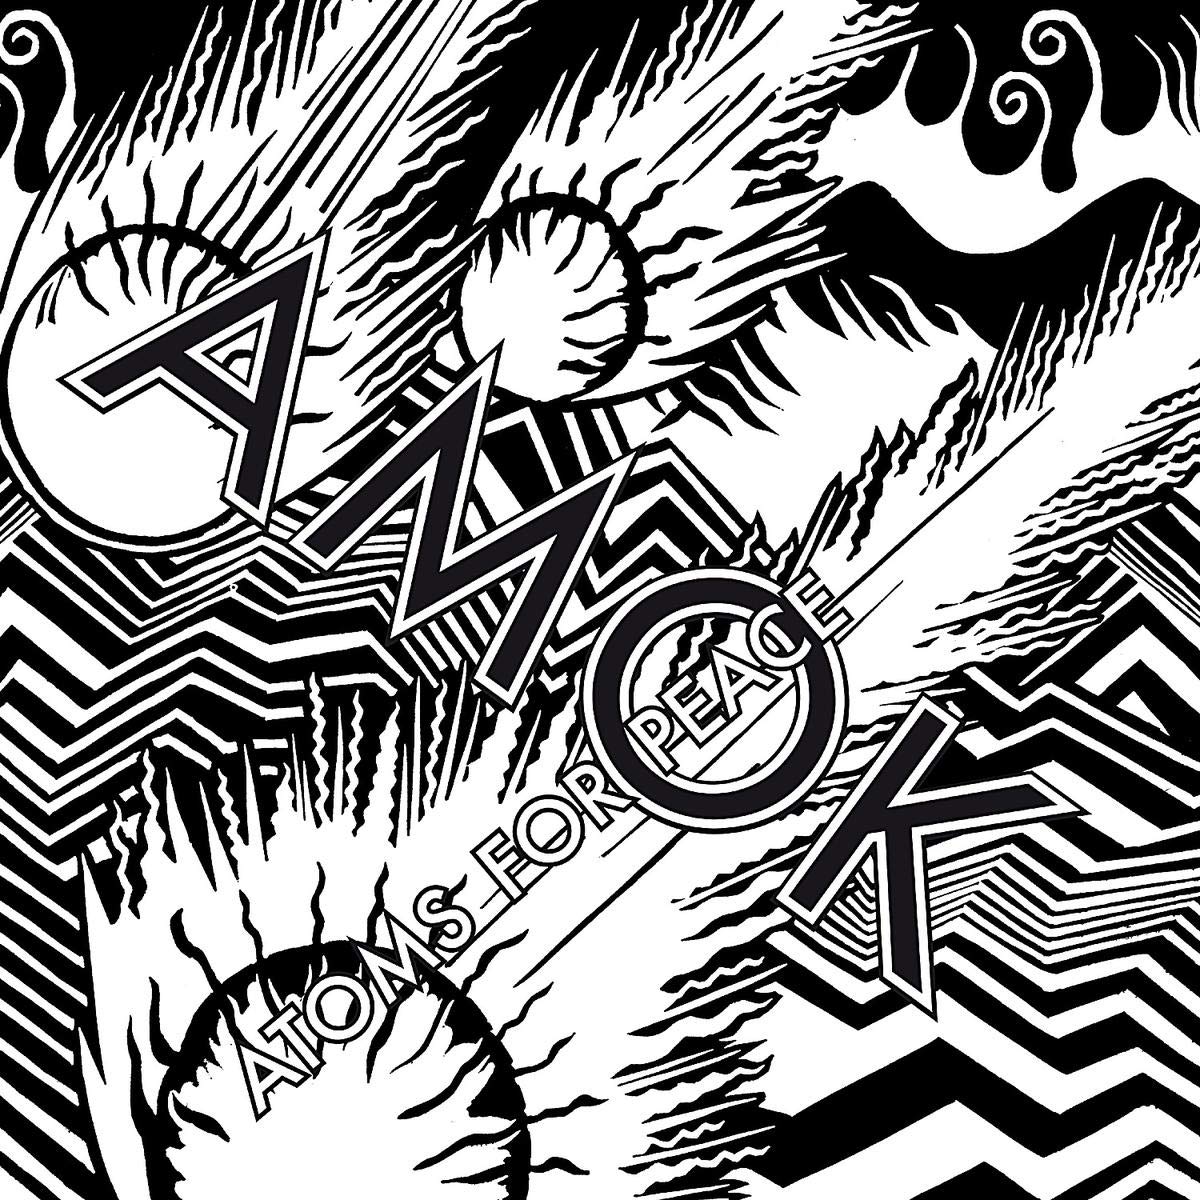 Atoms for Peace "Amok" 2LP